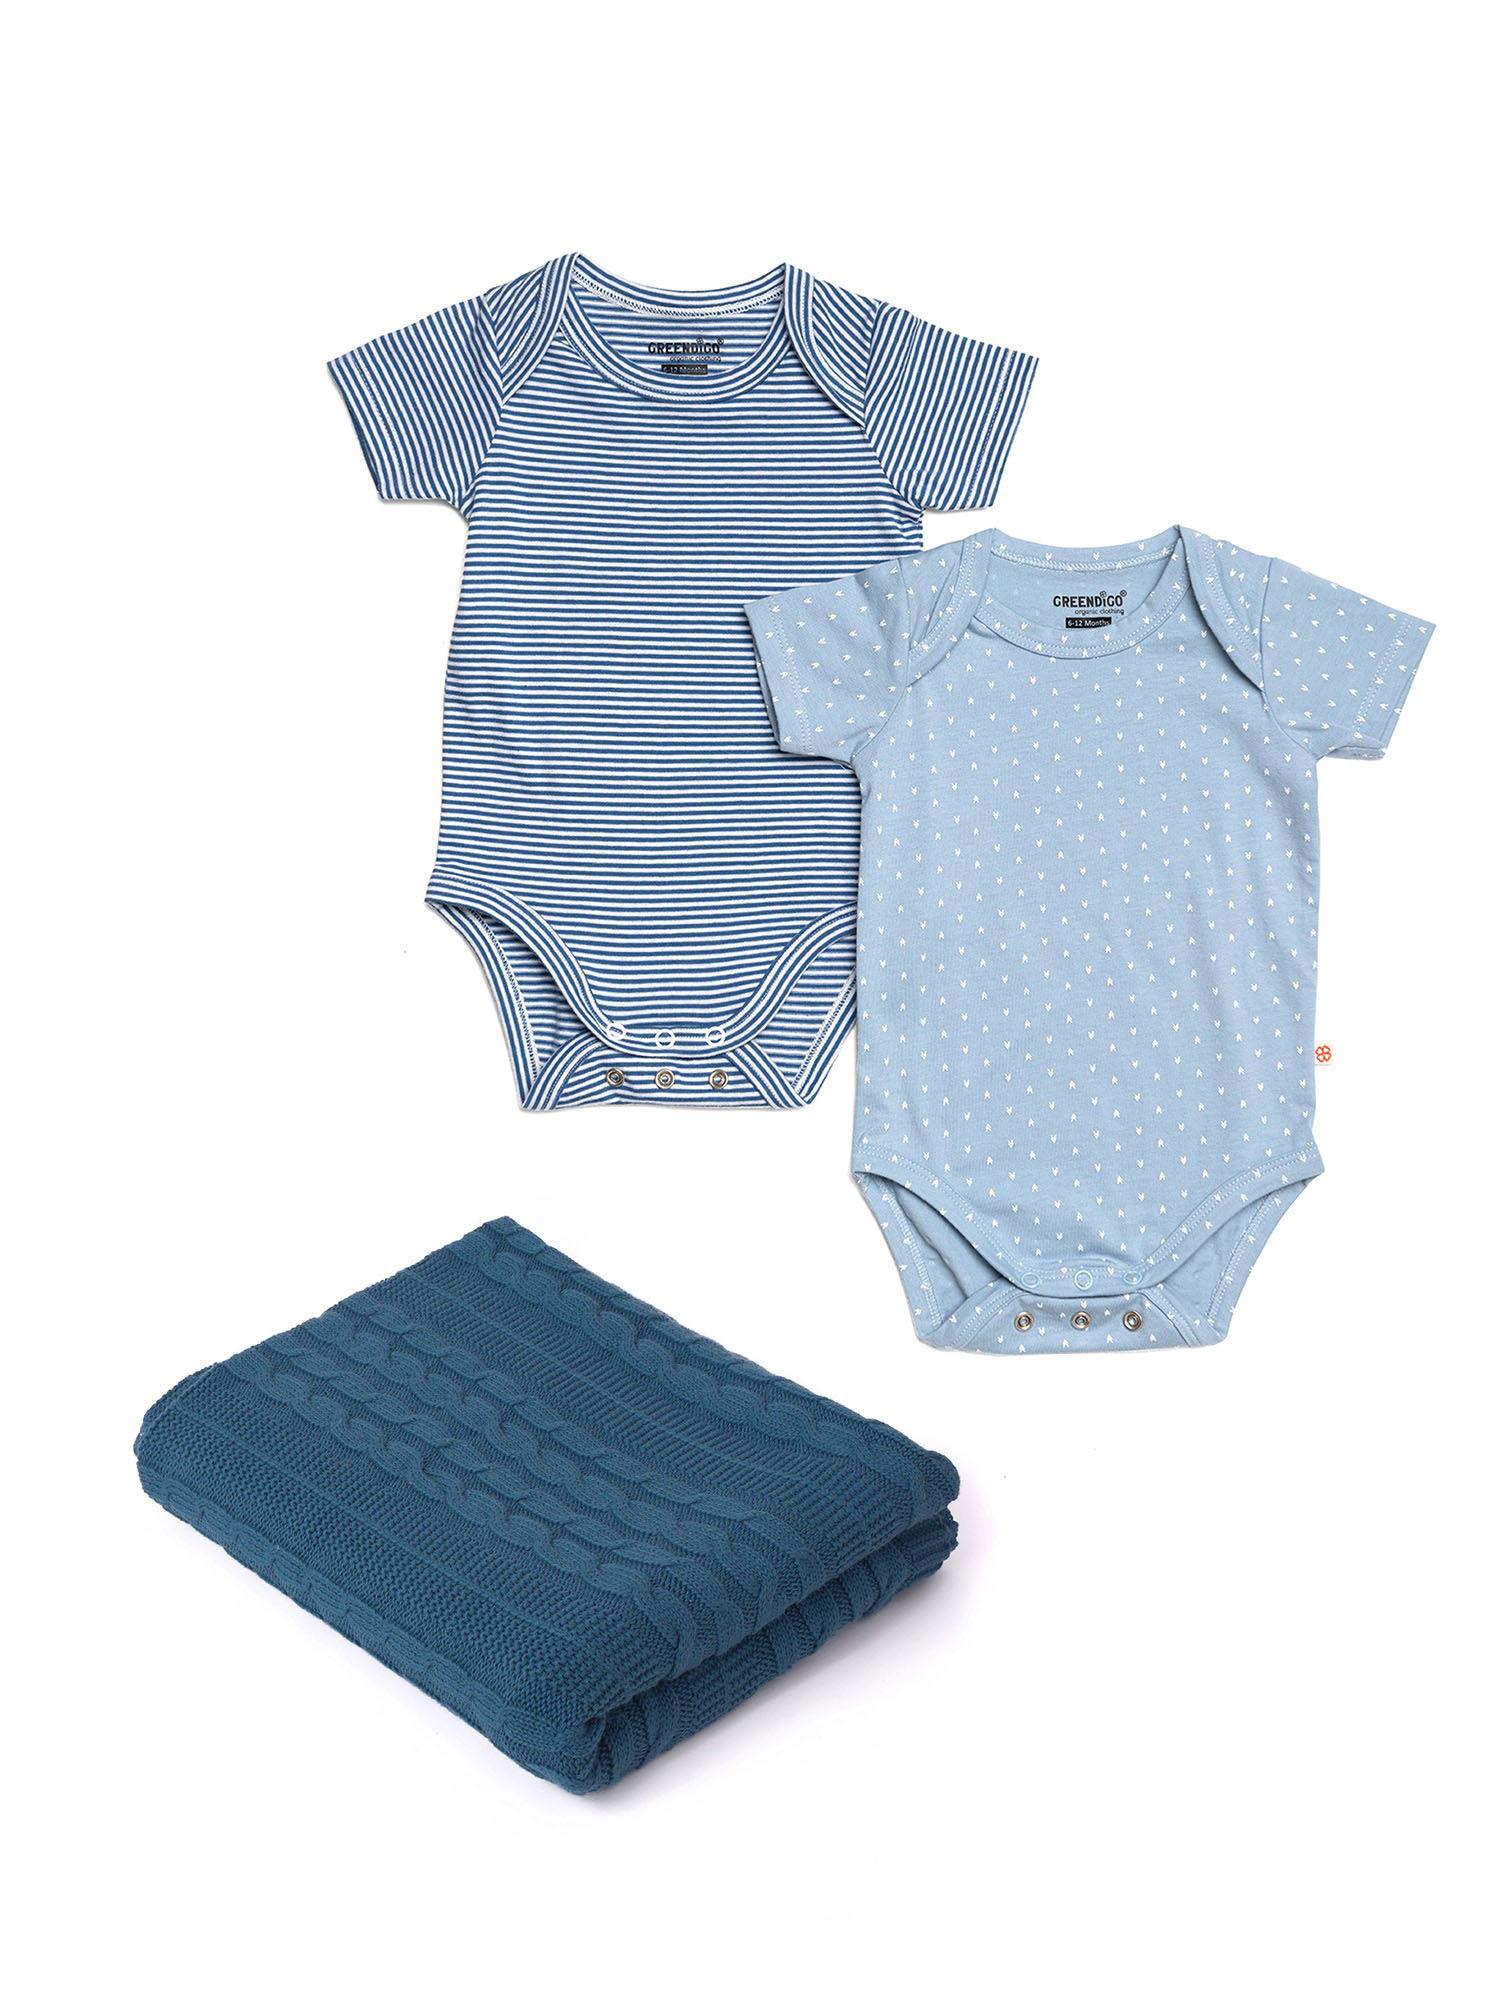 organic cotton baby onesies and blanket for babies (set of 3)